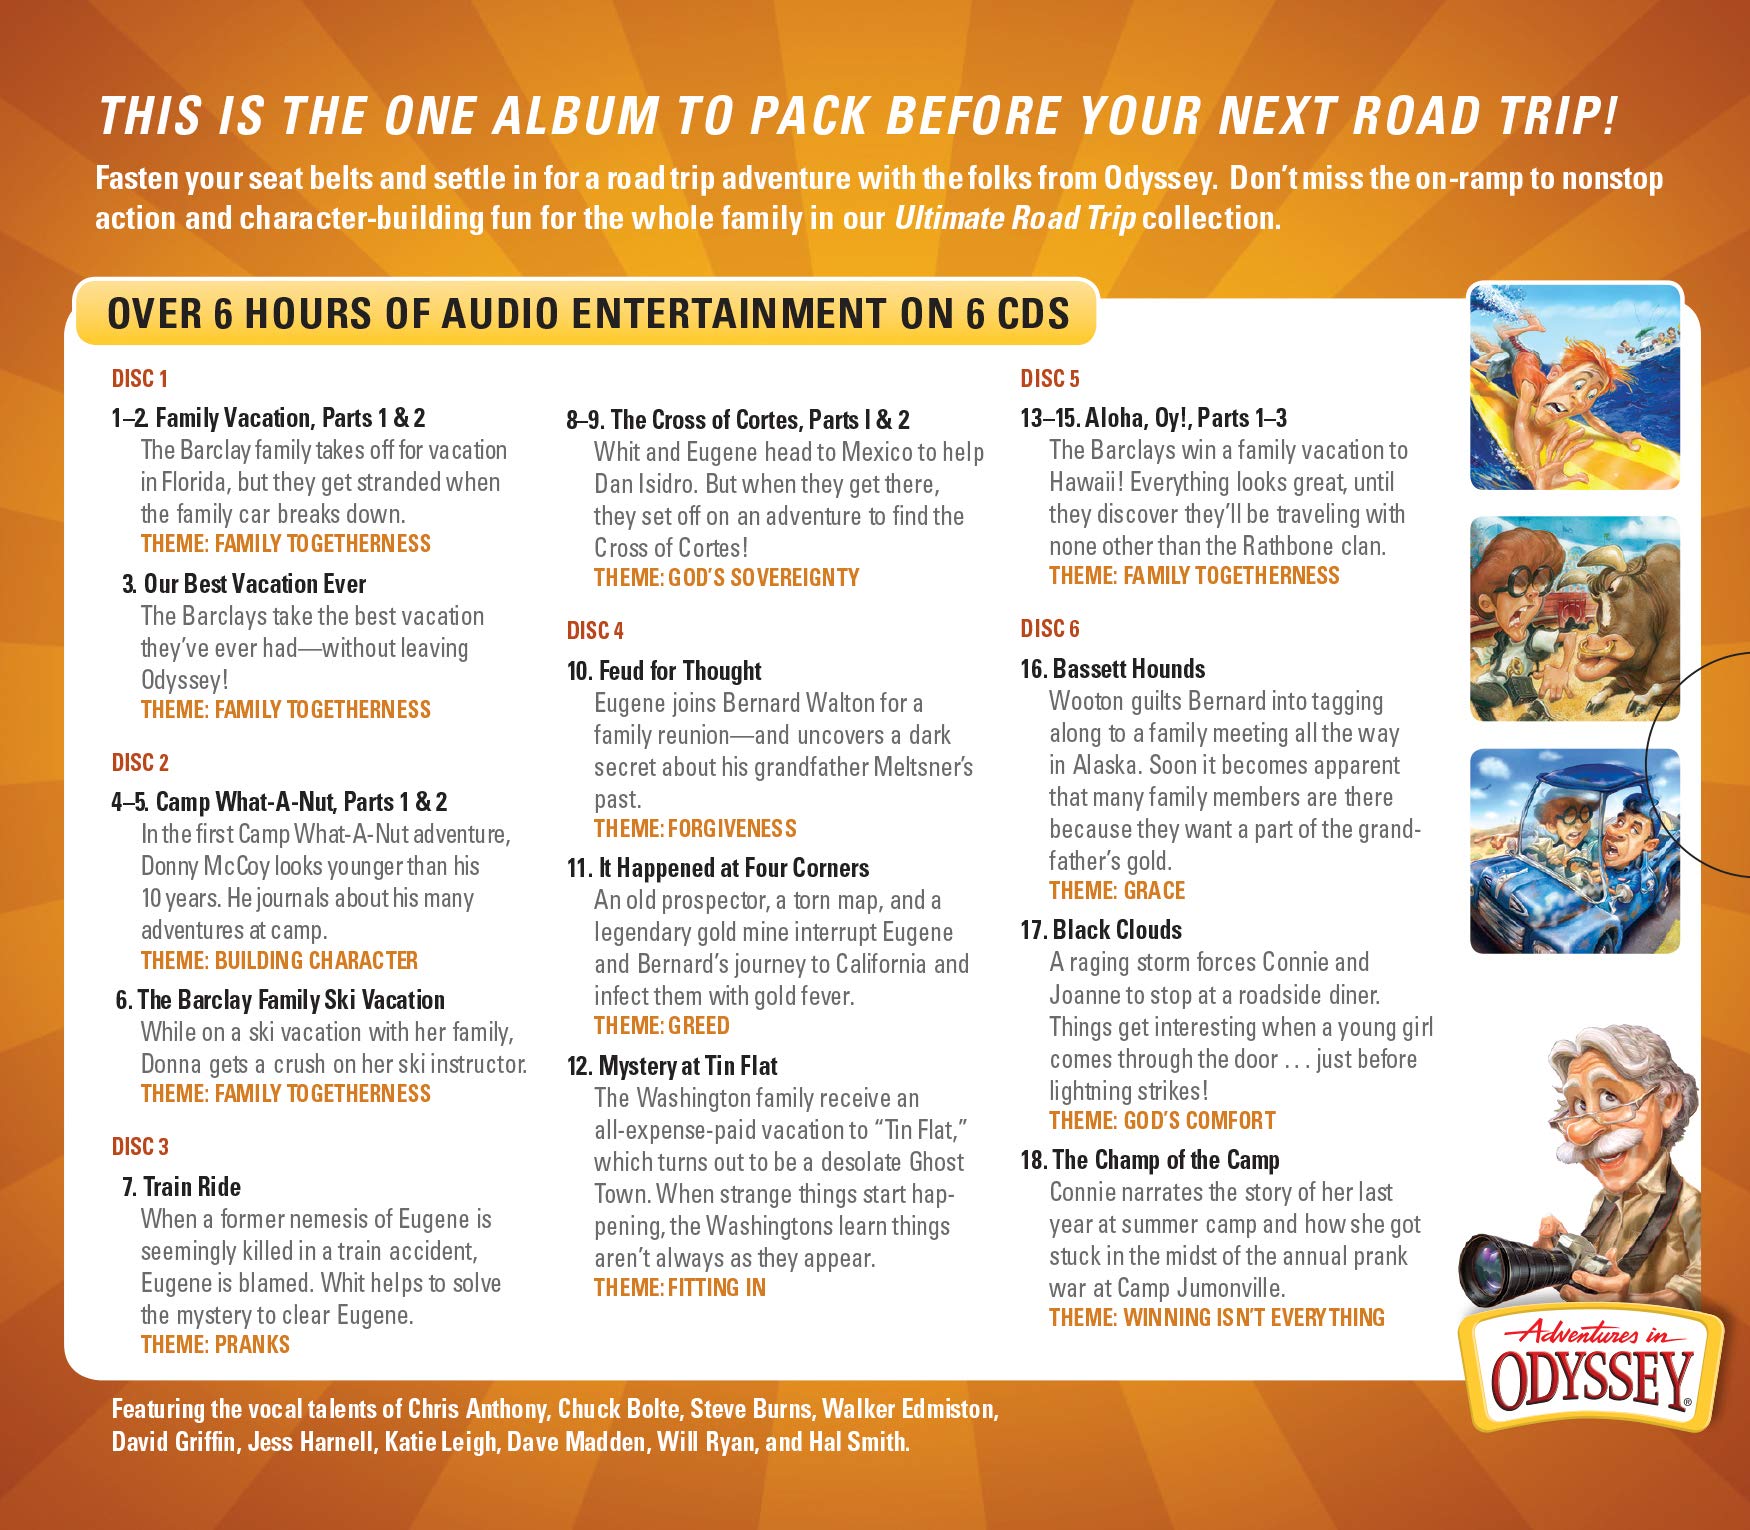 The Ultimate Road Trip: Family Vacation Collection (Adventures in Odyssey)